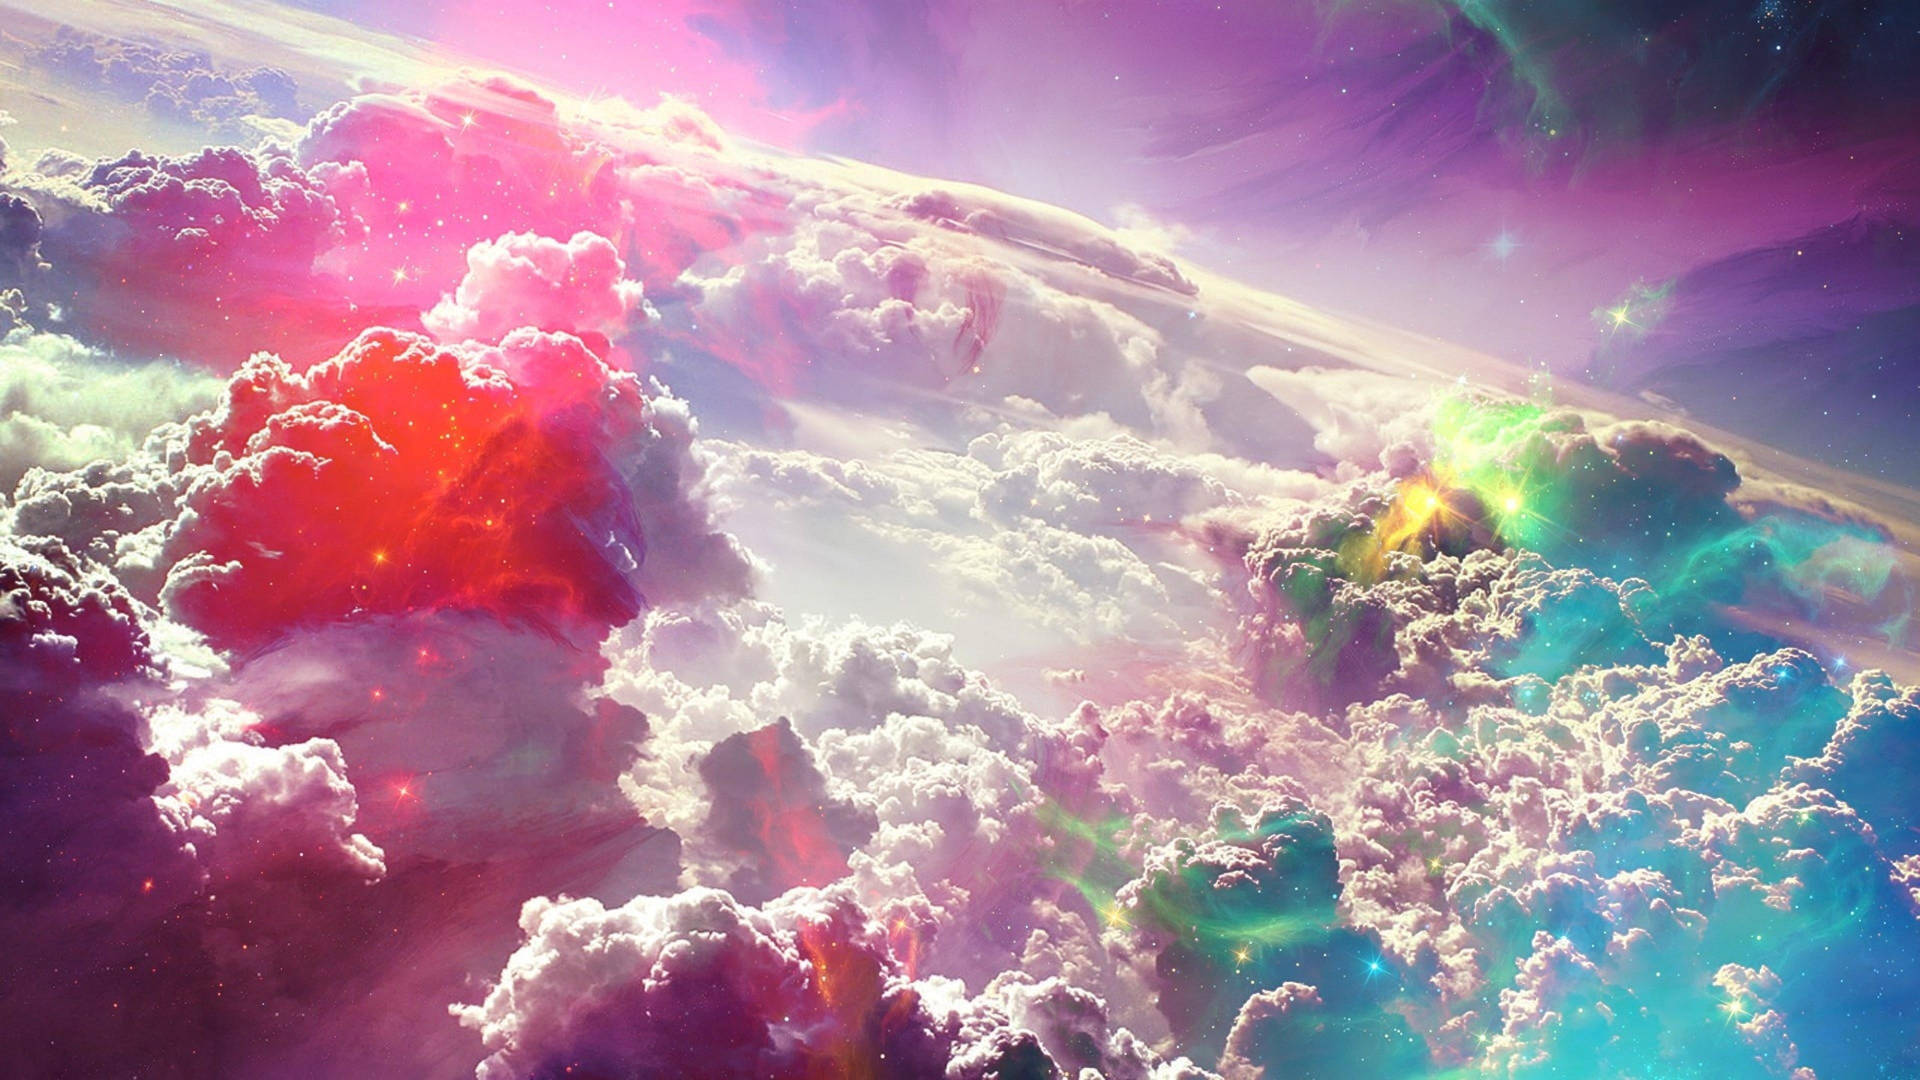 Clouds Floating In Rainbow Galaxy